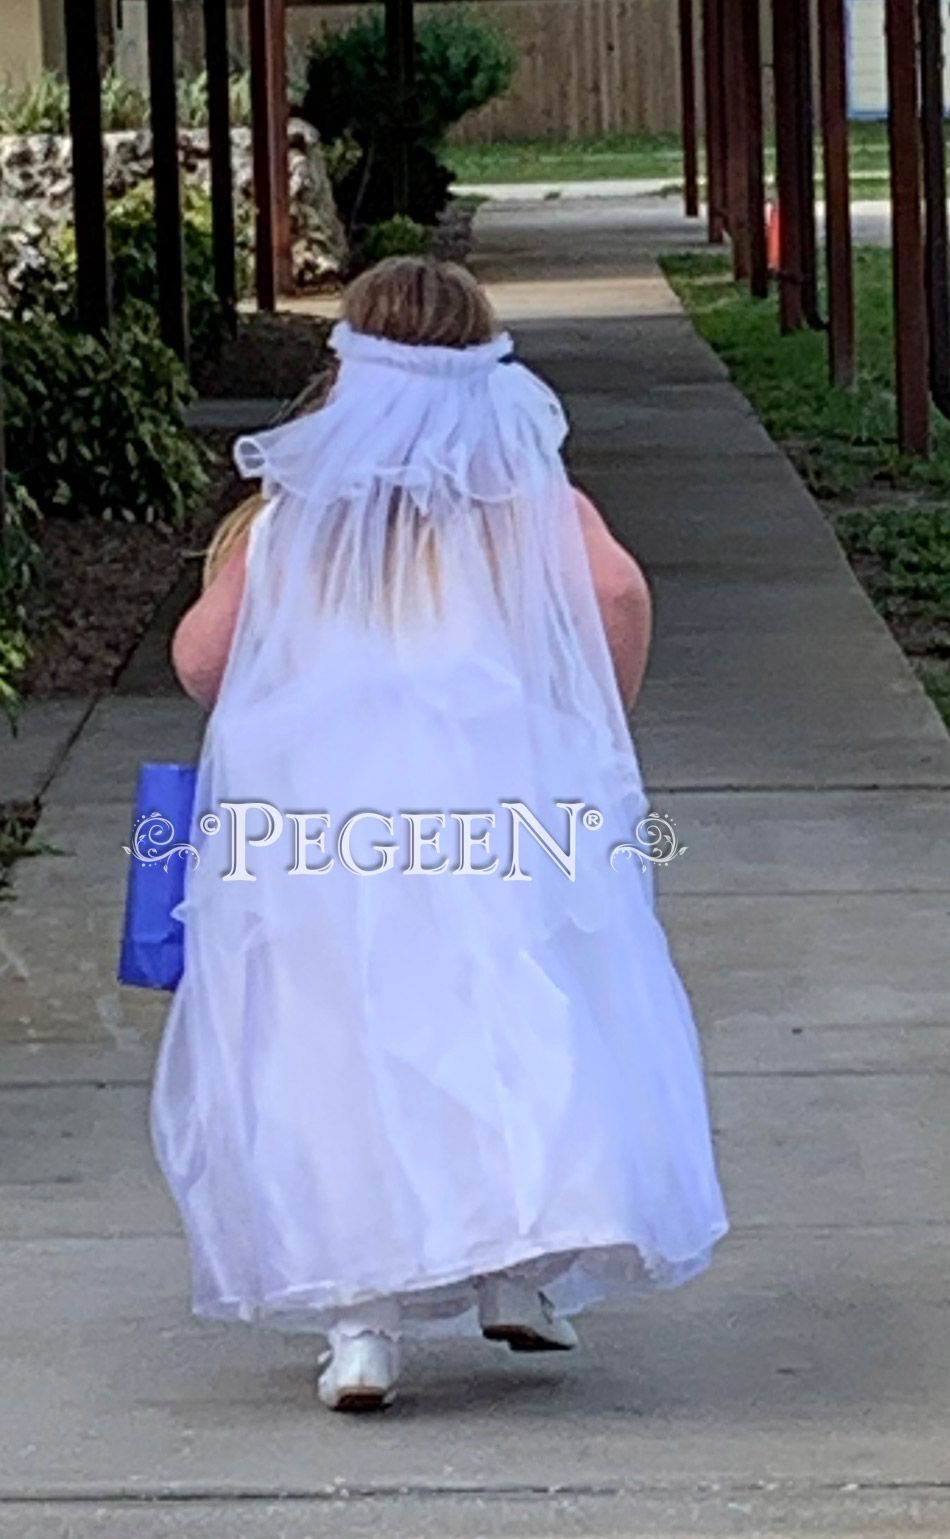 Plus Size First Communion or Flower Girl Dress of the Month - August 2019